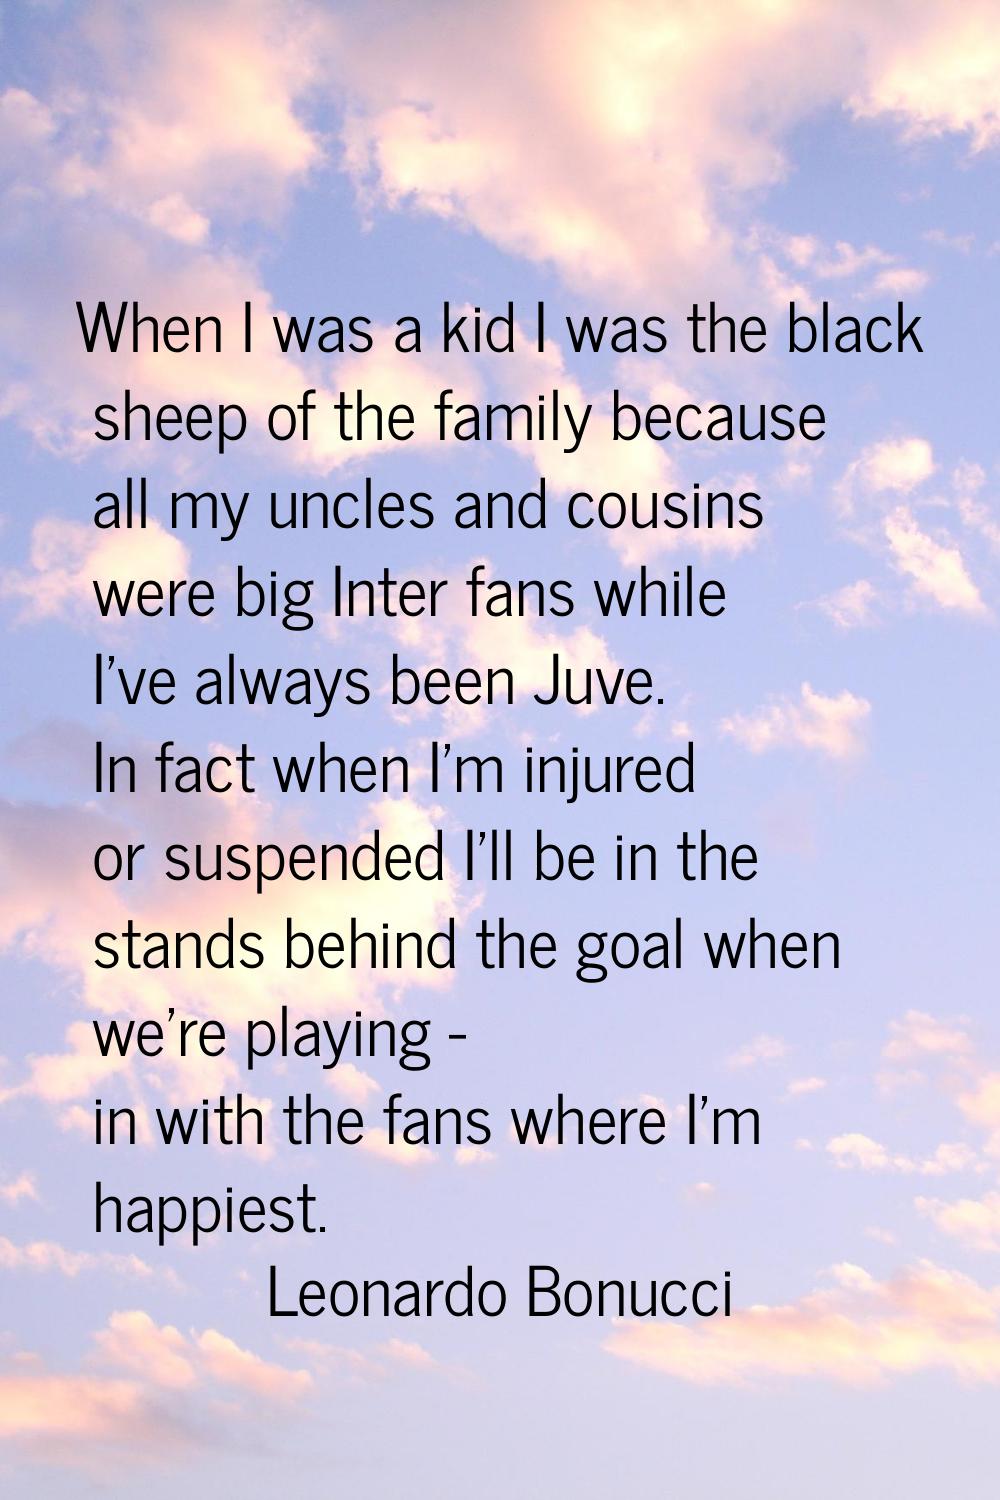 When I was a kid I was the black sheep of the family because all my uncles and cousins were big Int